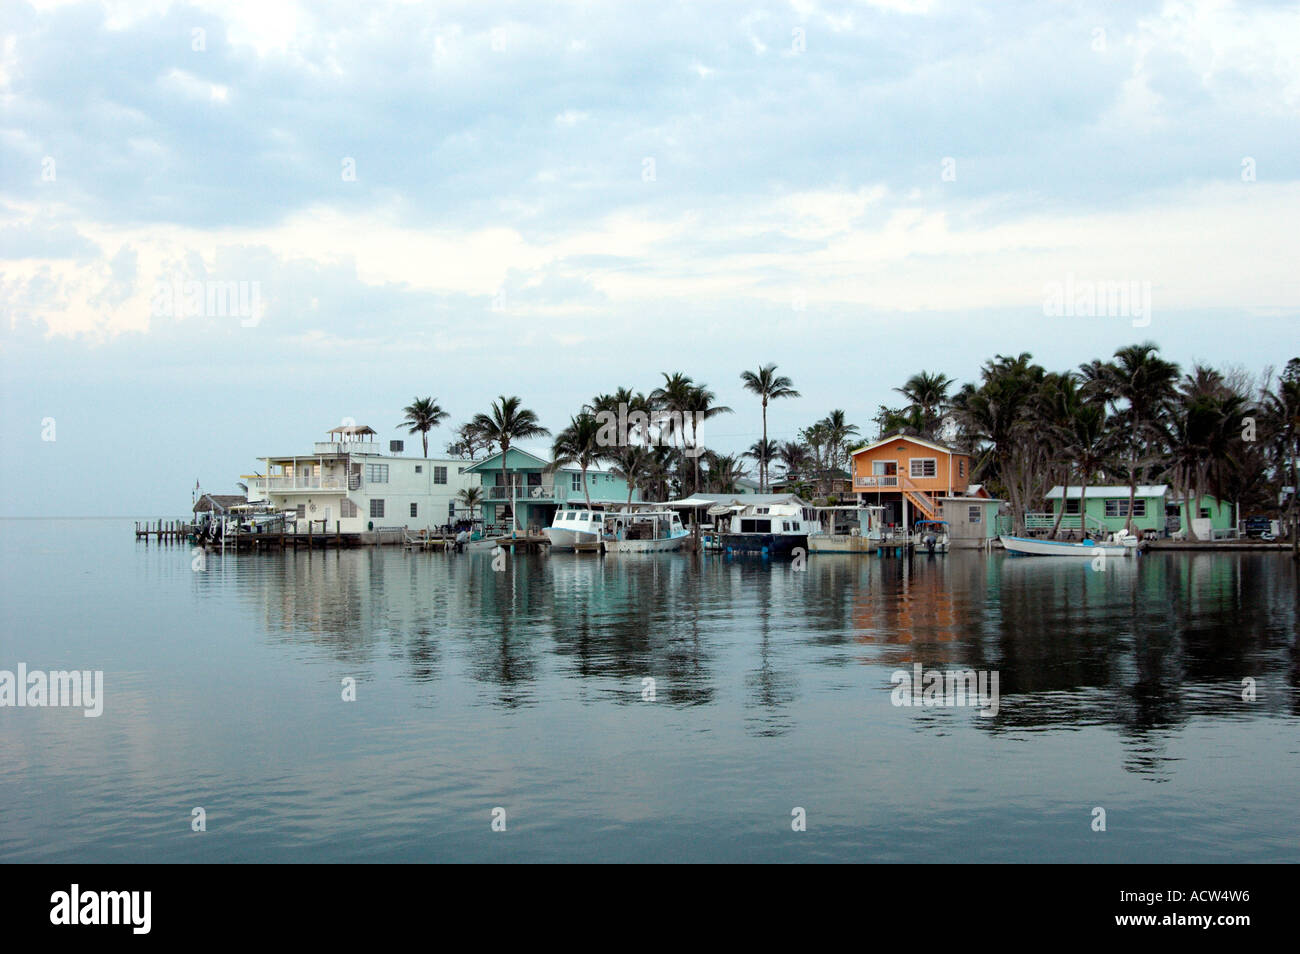 Resort Cottages With Reflections On Marathon Key In The Florida